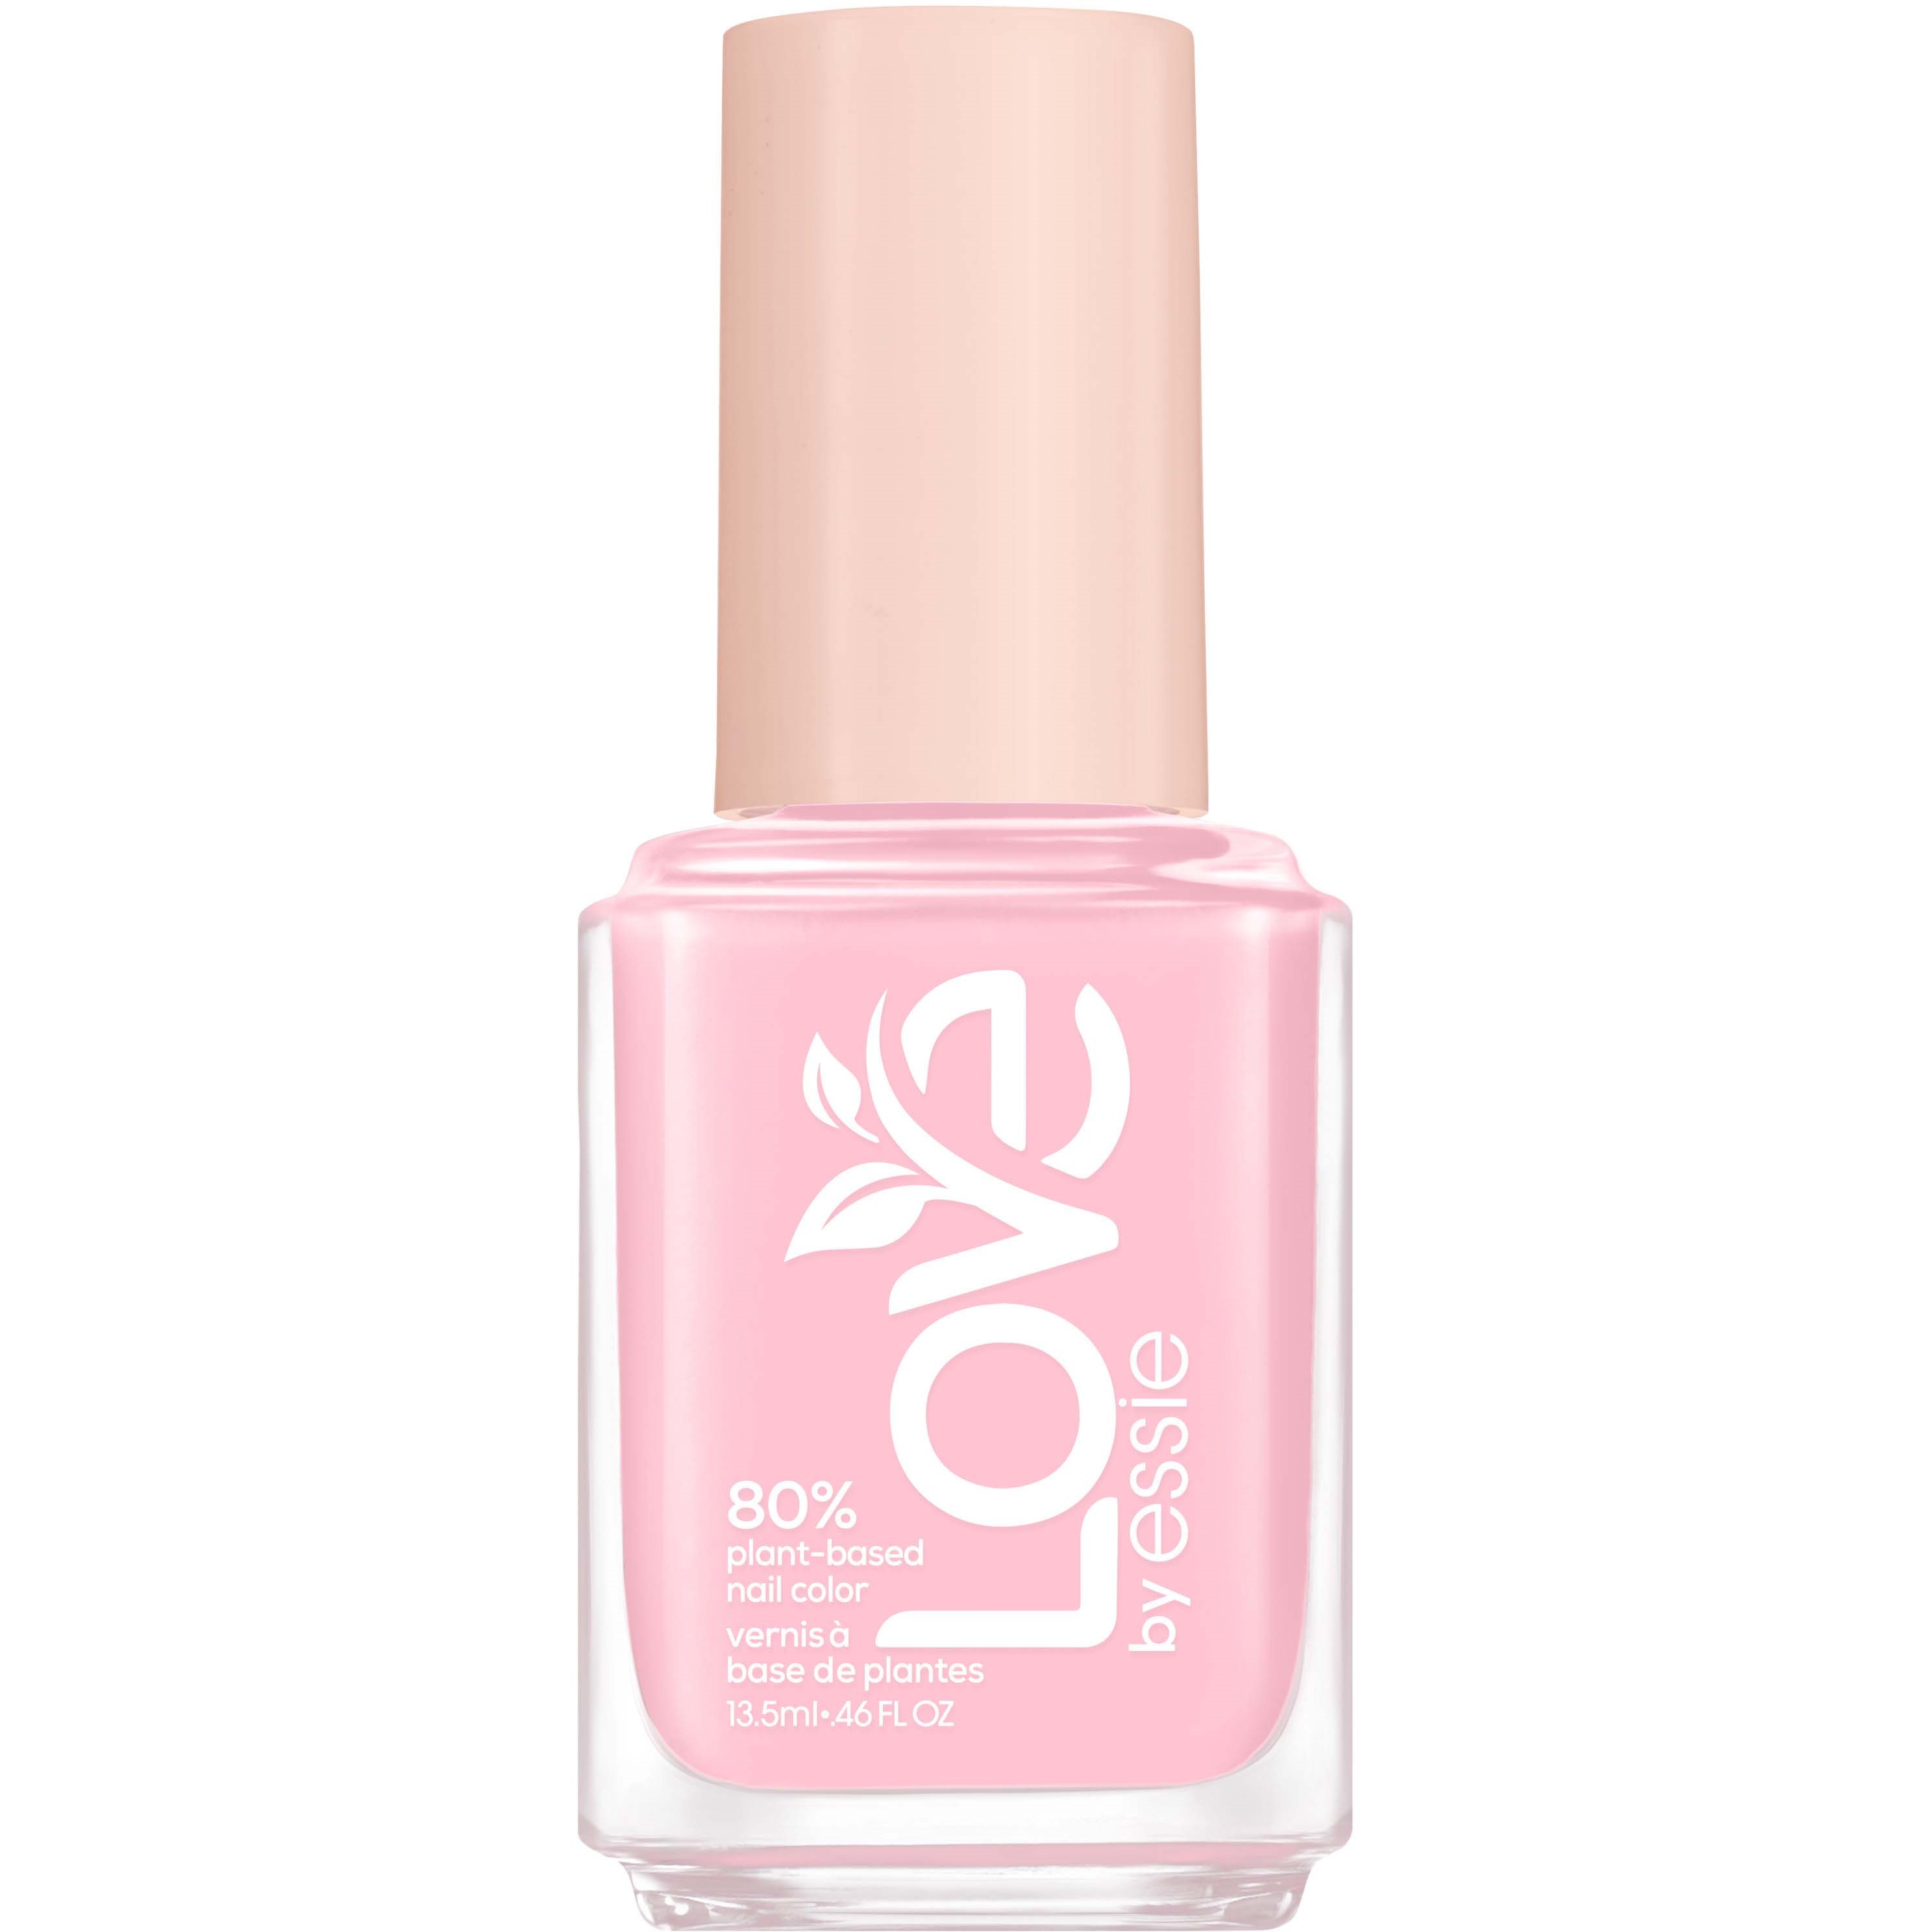 Essie LOVE by Essie 80% Plant-based Nail Color 50 Free In Me